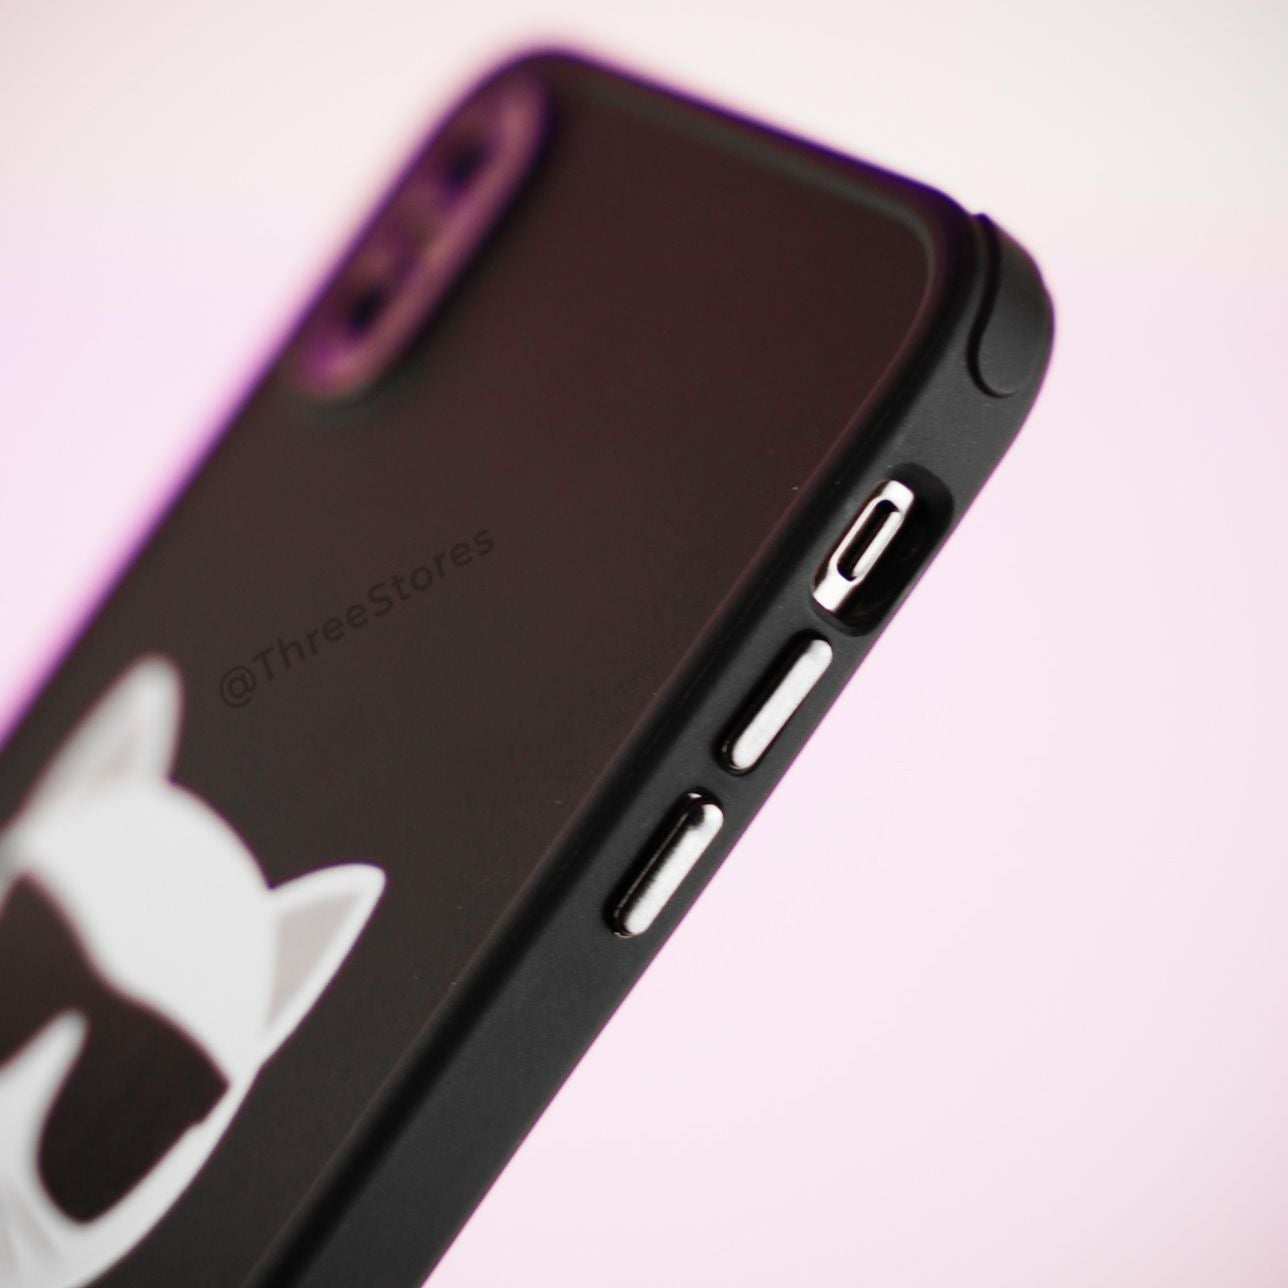 Karl Silicone Case iPhone X